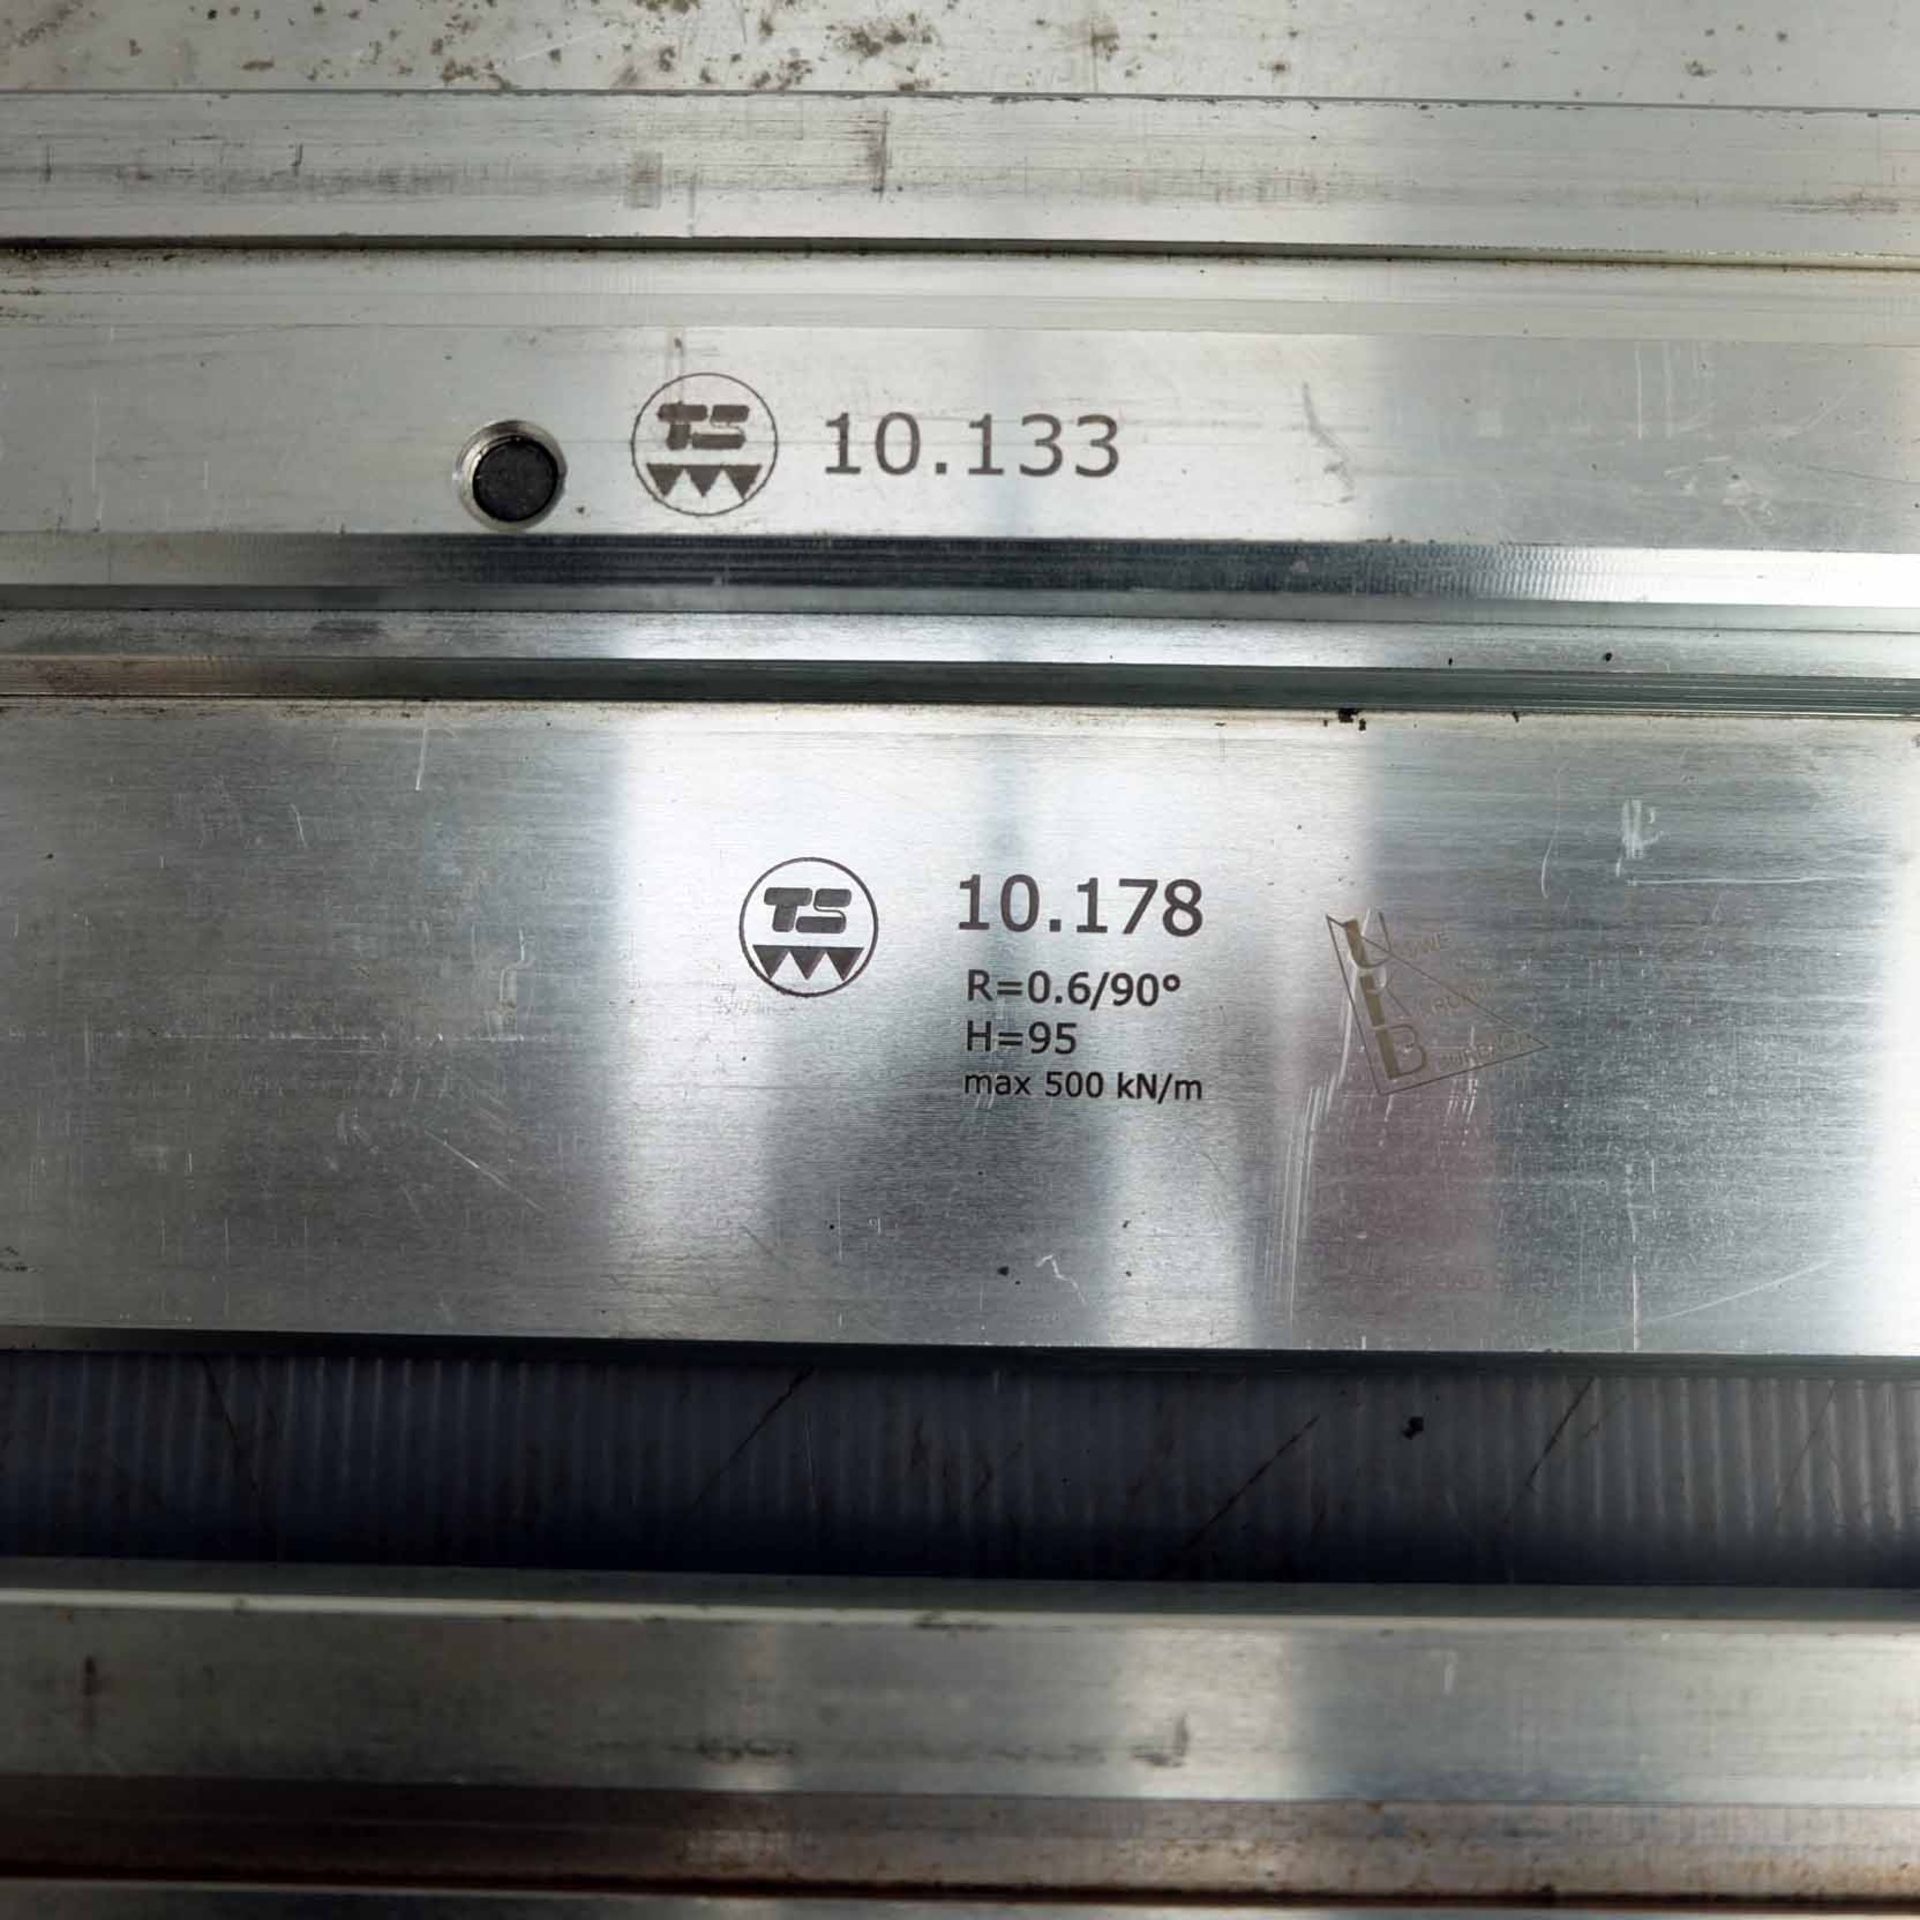 Tecnostamp Press Brake Punch Tools With Holders. Model 10.133. 10.178. R - 0.6/90 Degrees. H - 95. 4 - Image 2 of 5